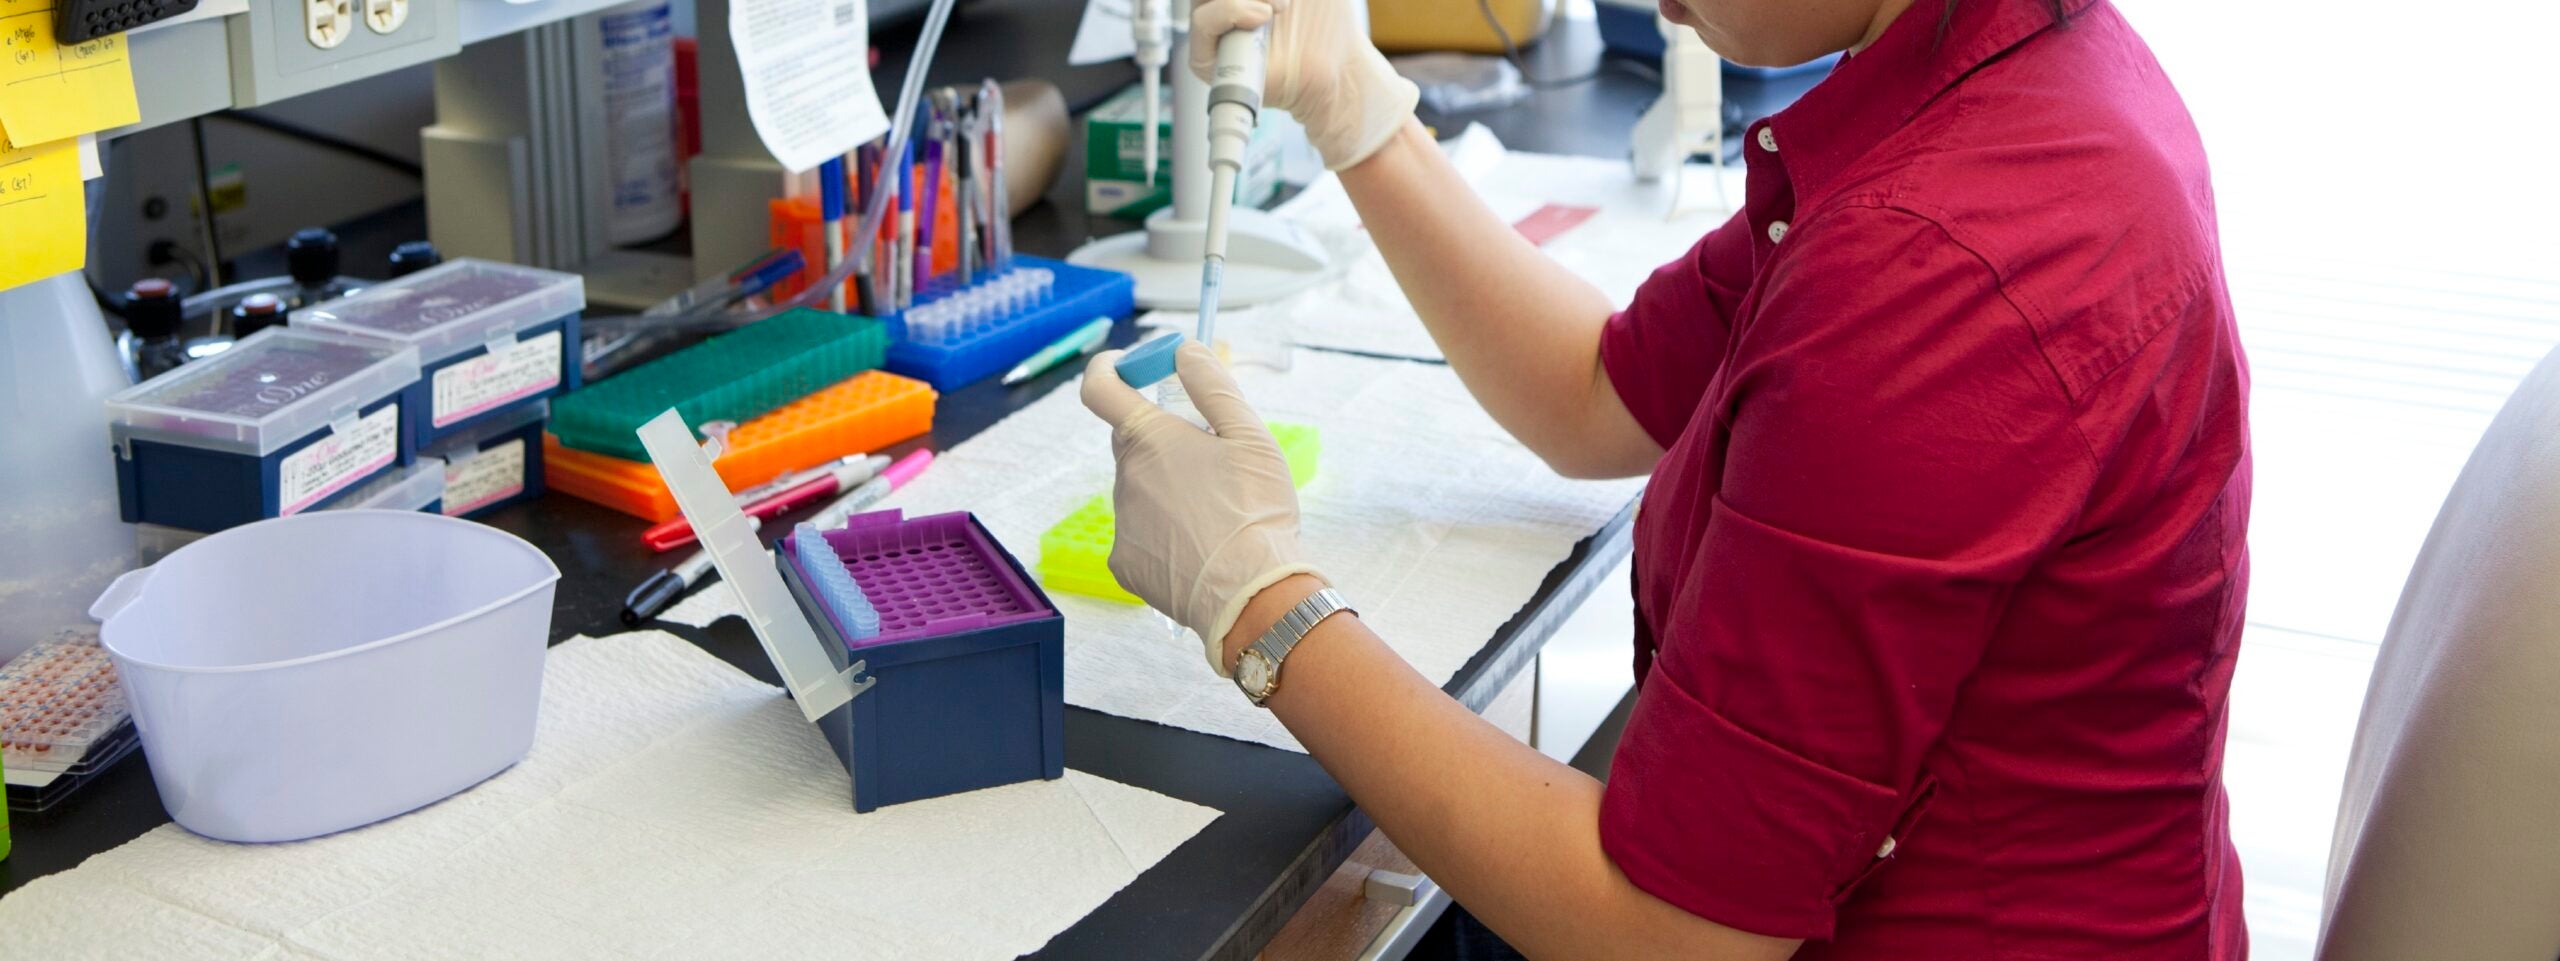 Lab technician wearing a pink shirt uses a pipette to transfer liquid